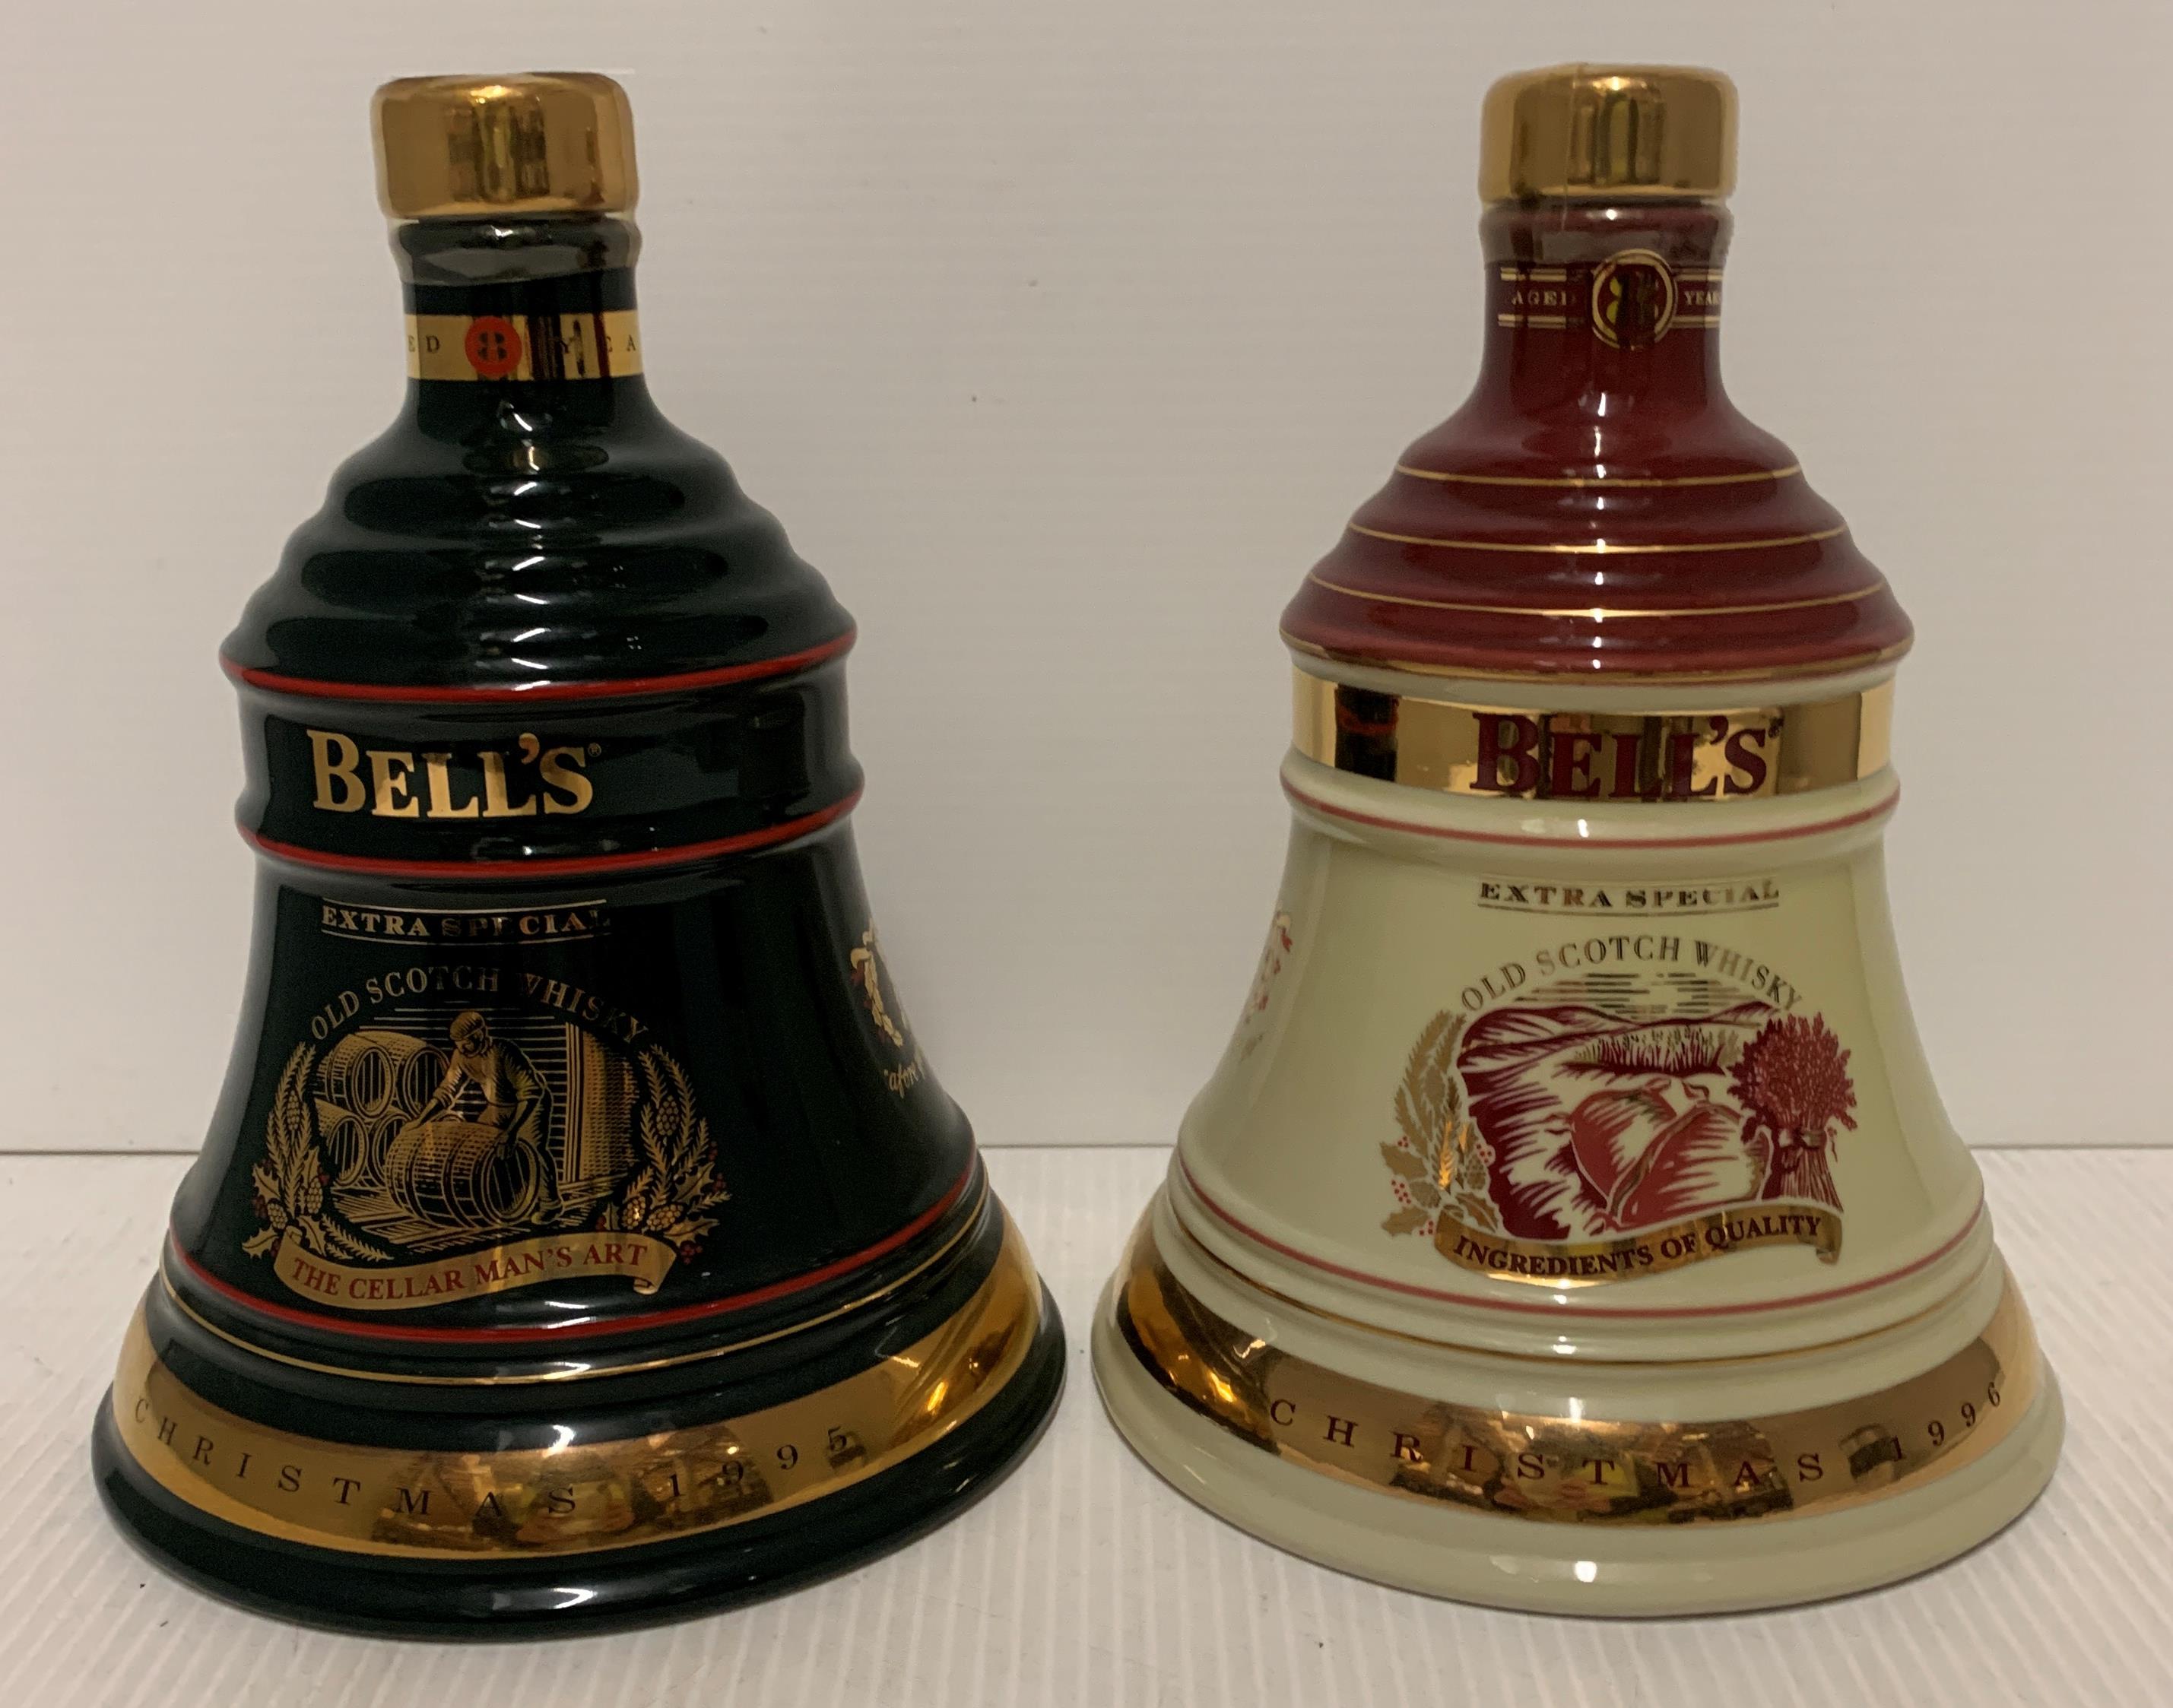 Two 75cl Wade porcelain decanters of Bell's Old Scotch whisky to celebrate Christmas 1995 and 1996